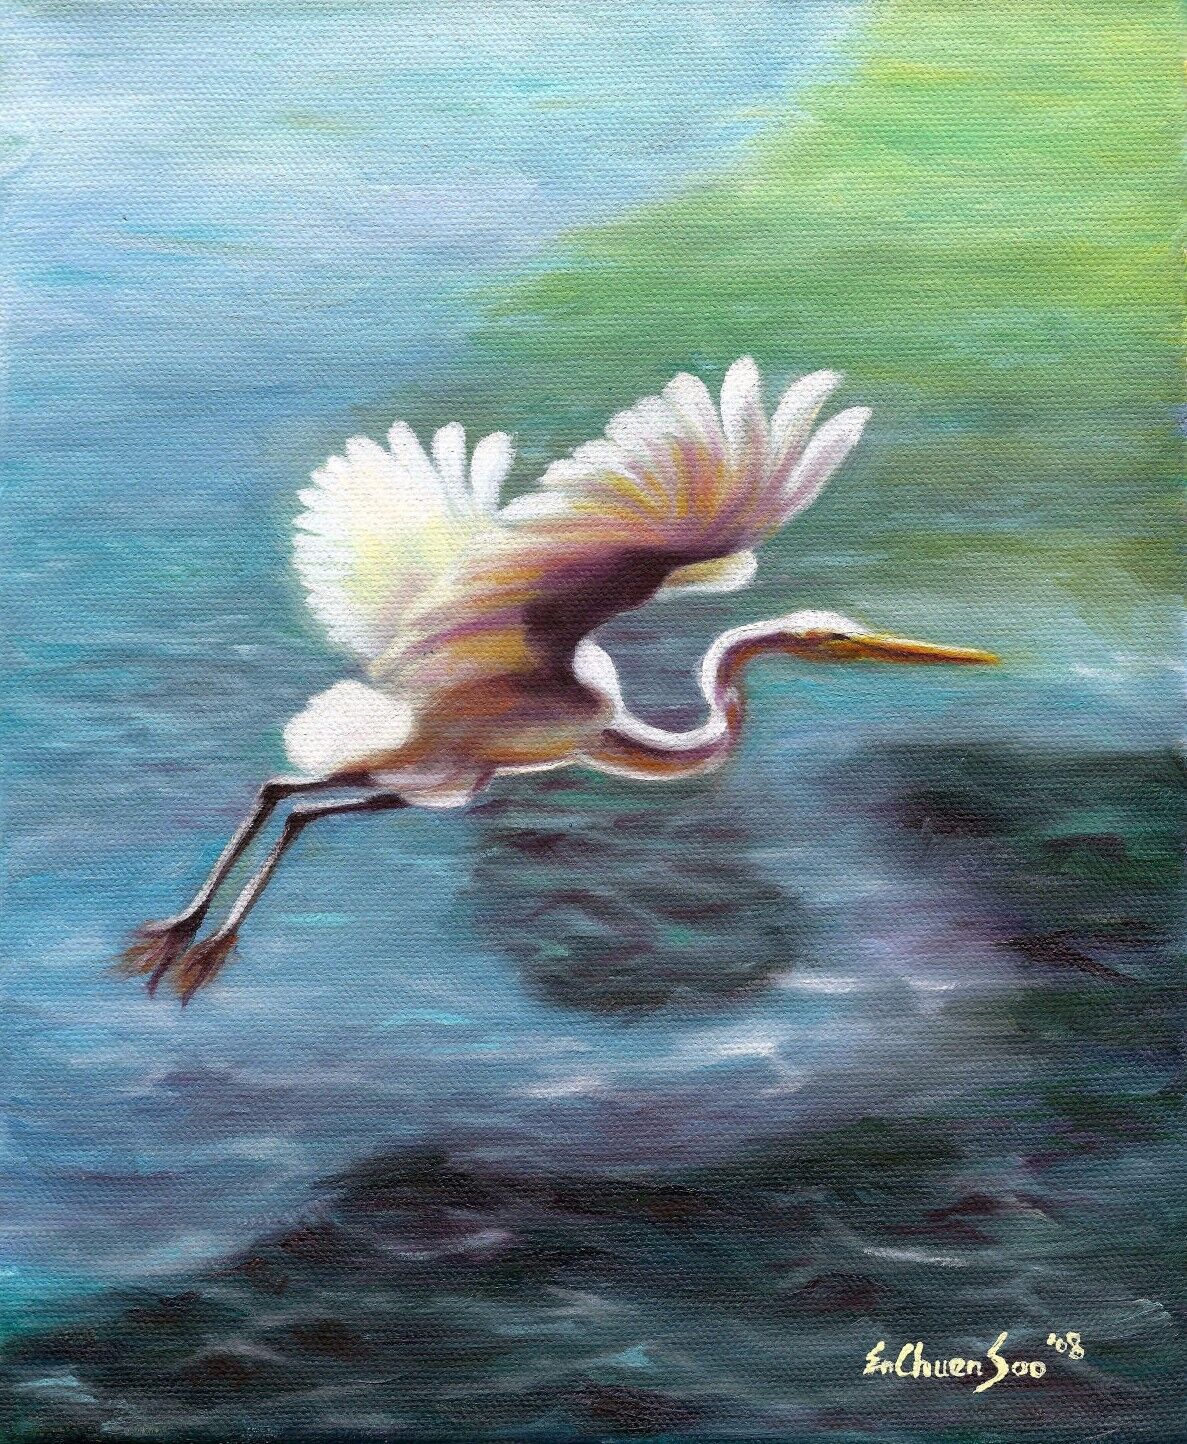 Original Oil Painting of Snowy Egret - Born To Fish, 8x10in, Framed, Signed 